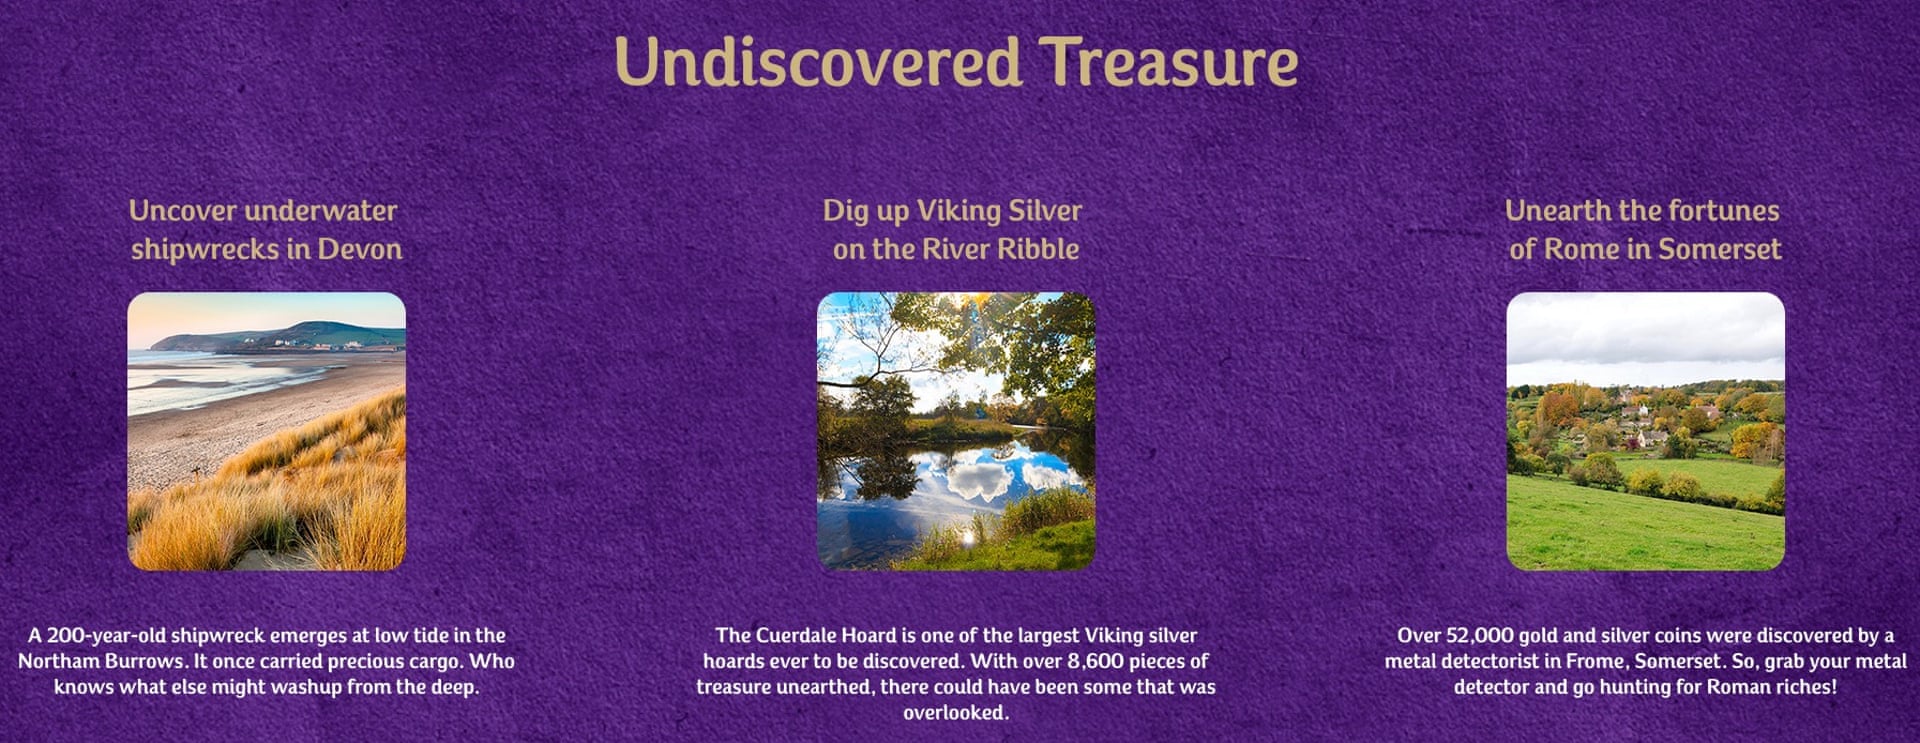 Cadbury's Treasure Island campaign focuses on Devon, Somerset and the River Ribble.